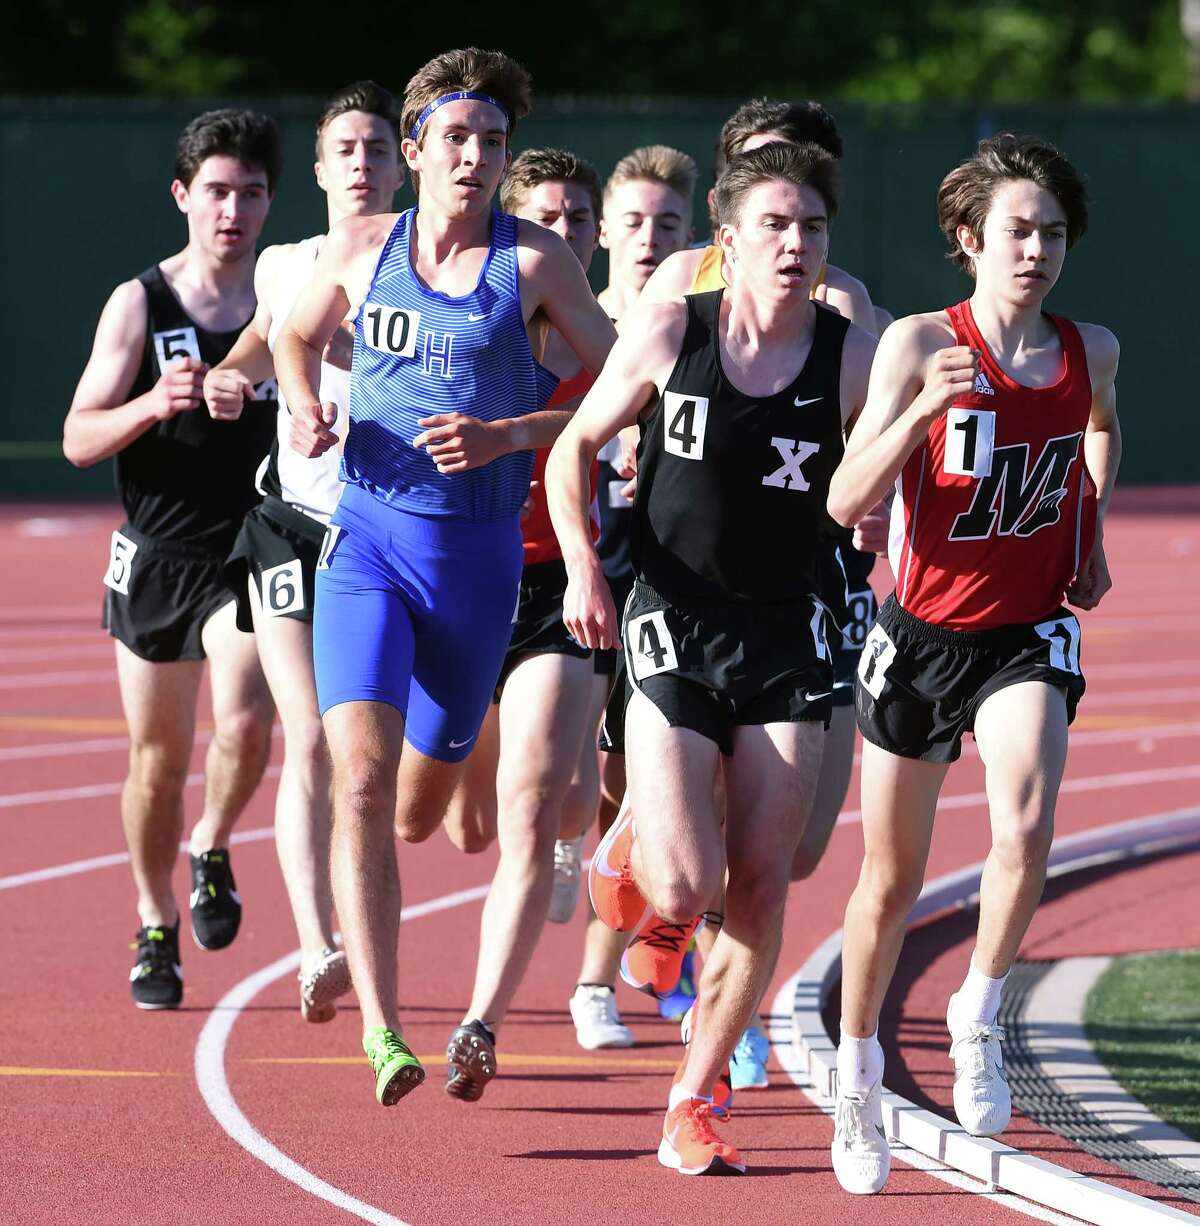 Robbie Cozean (second from right) of Xavier stays on the heels of Aidan Puffer (right) of Manchester in the 3200 meter run at the CIAC State Open Outdoor Track & Field Championship in New Britain on June 3, 2019. Cozean won the event and Puffer placed second.